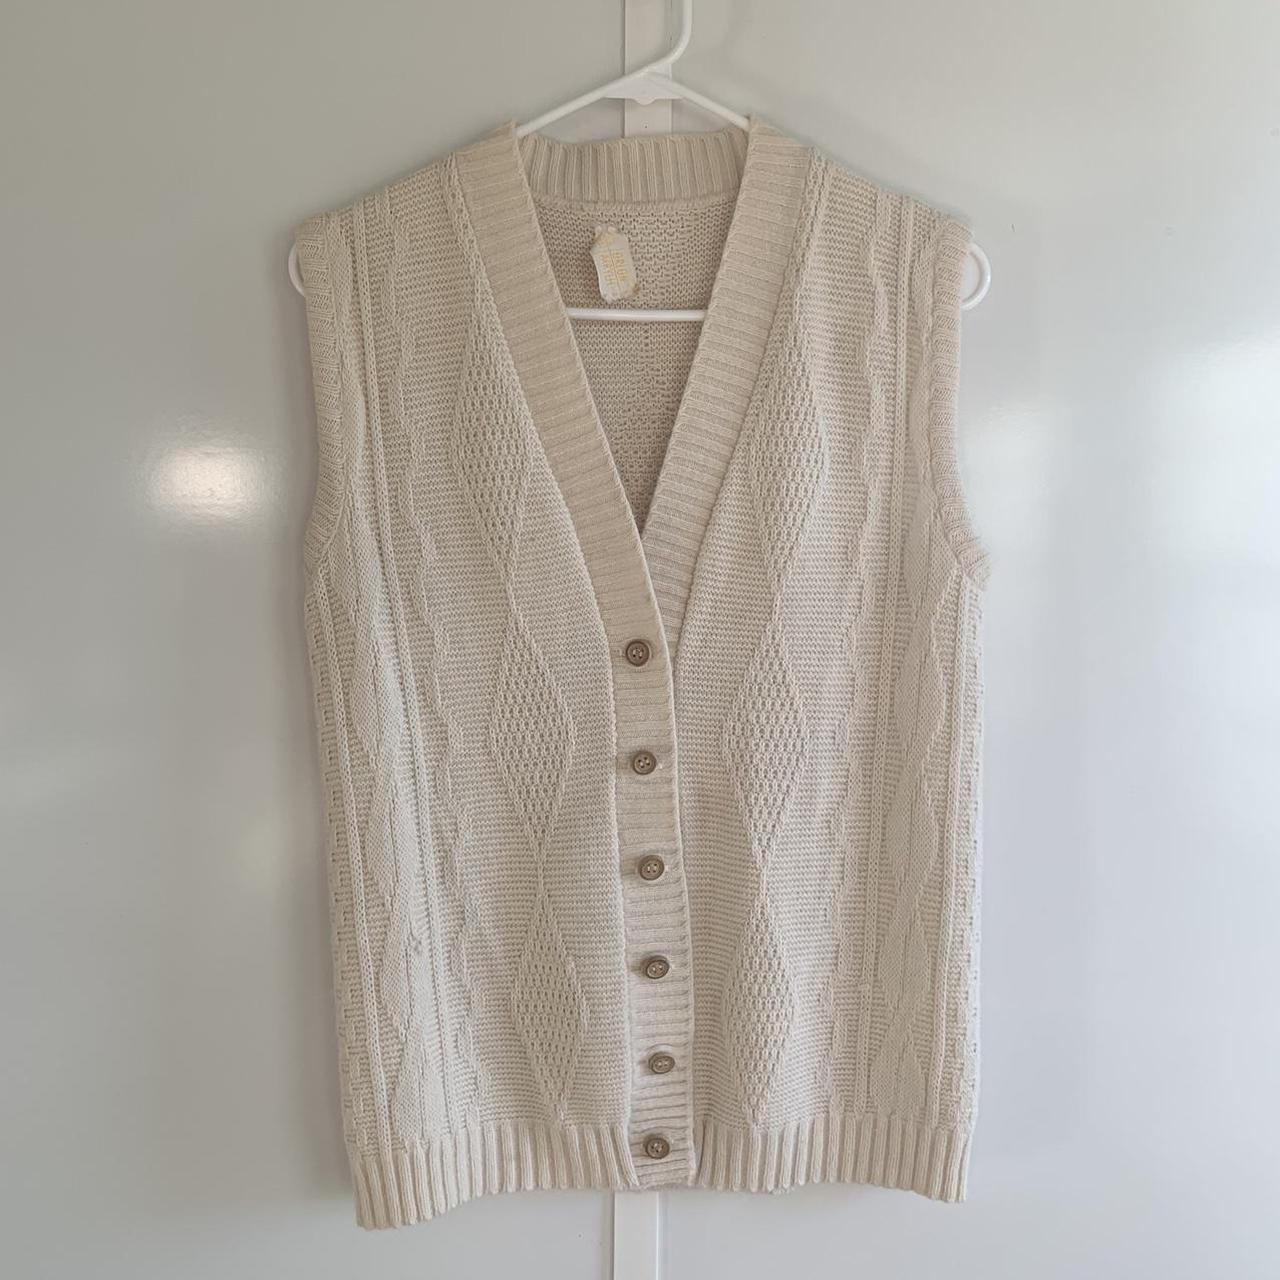 How to knit a sweater vest – Tagged Tops